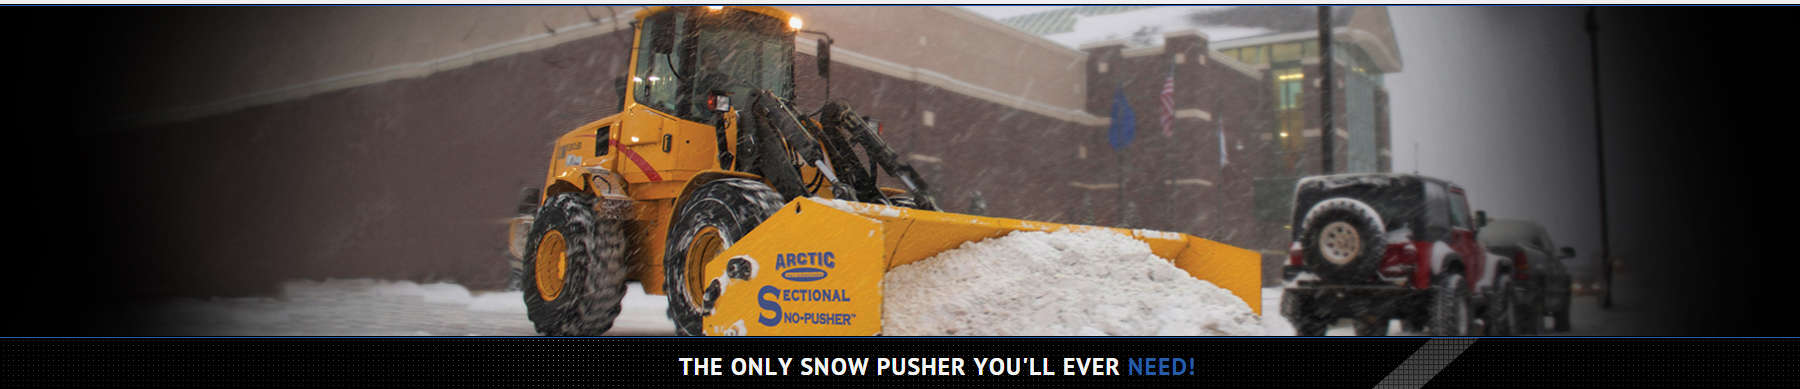 Arctic Snow Pushers & Dump Trailers in Frederick MD